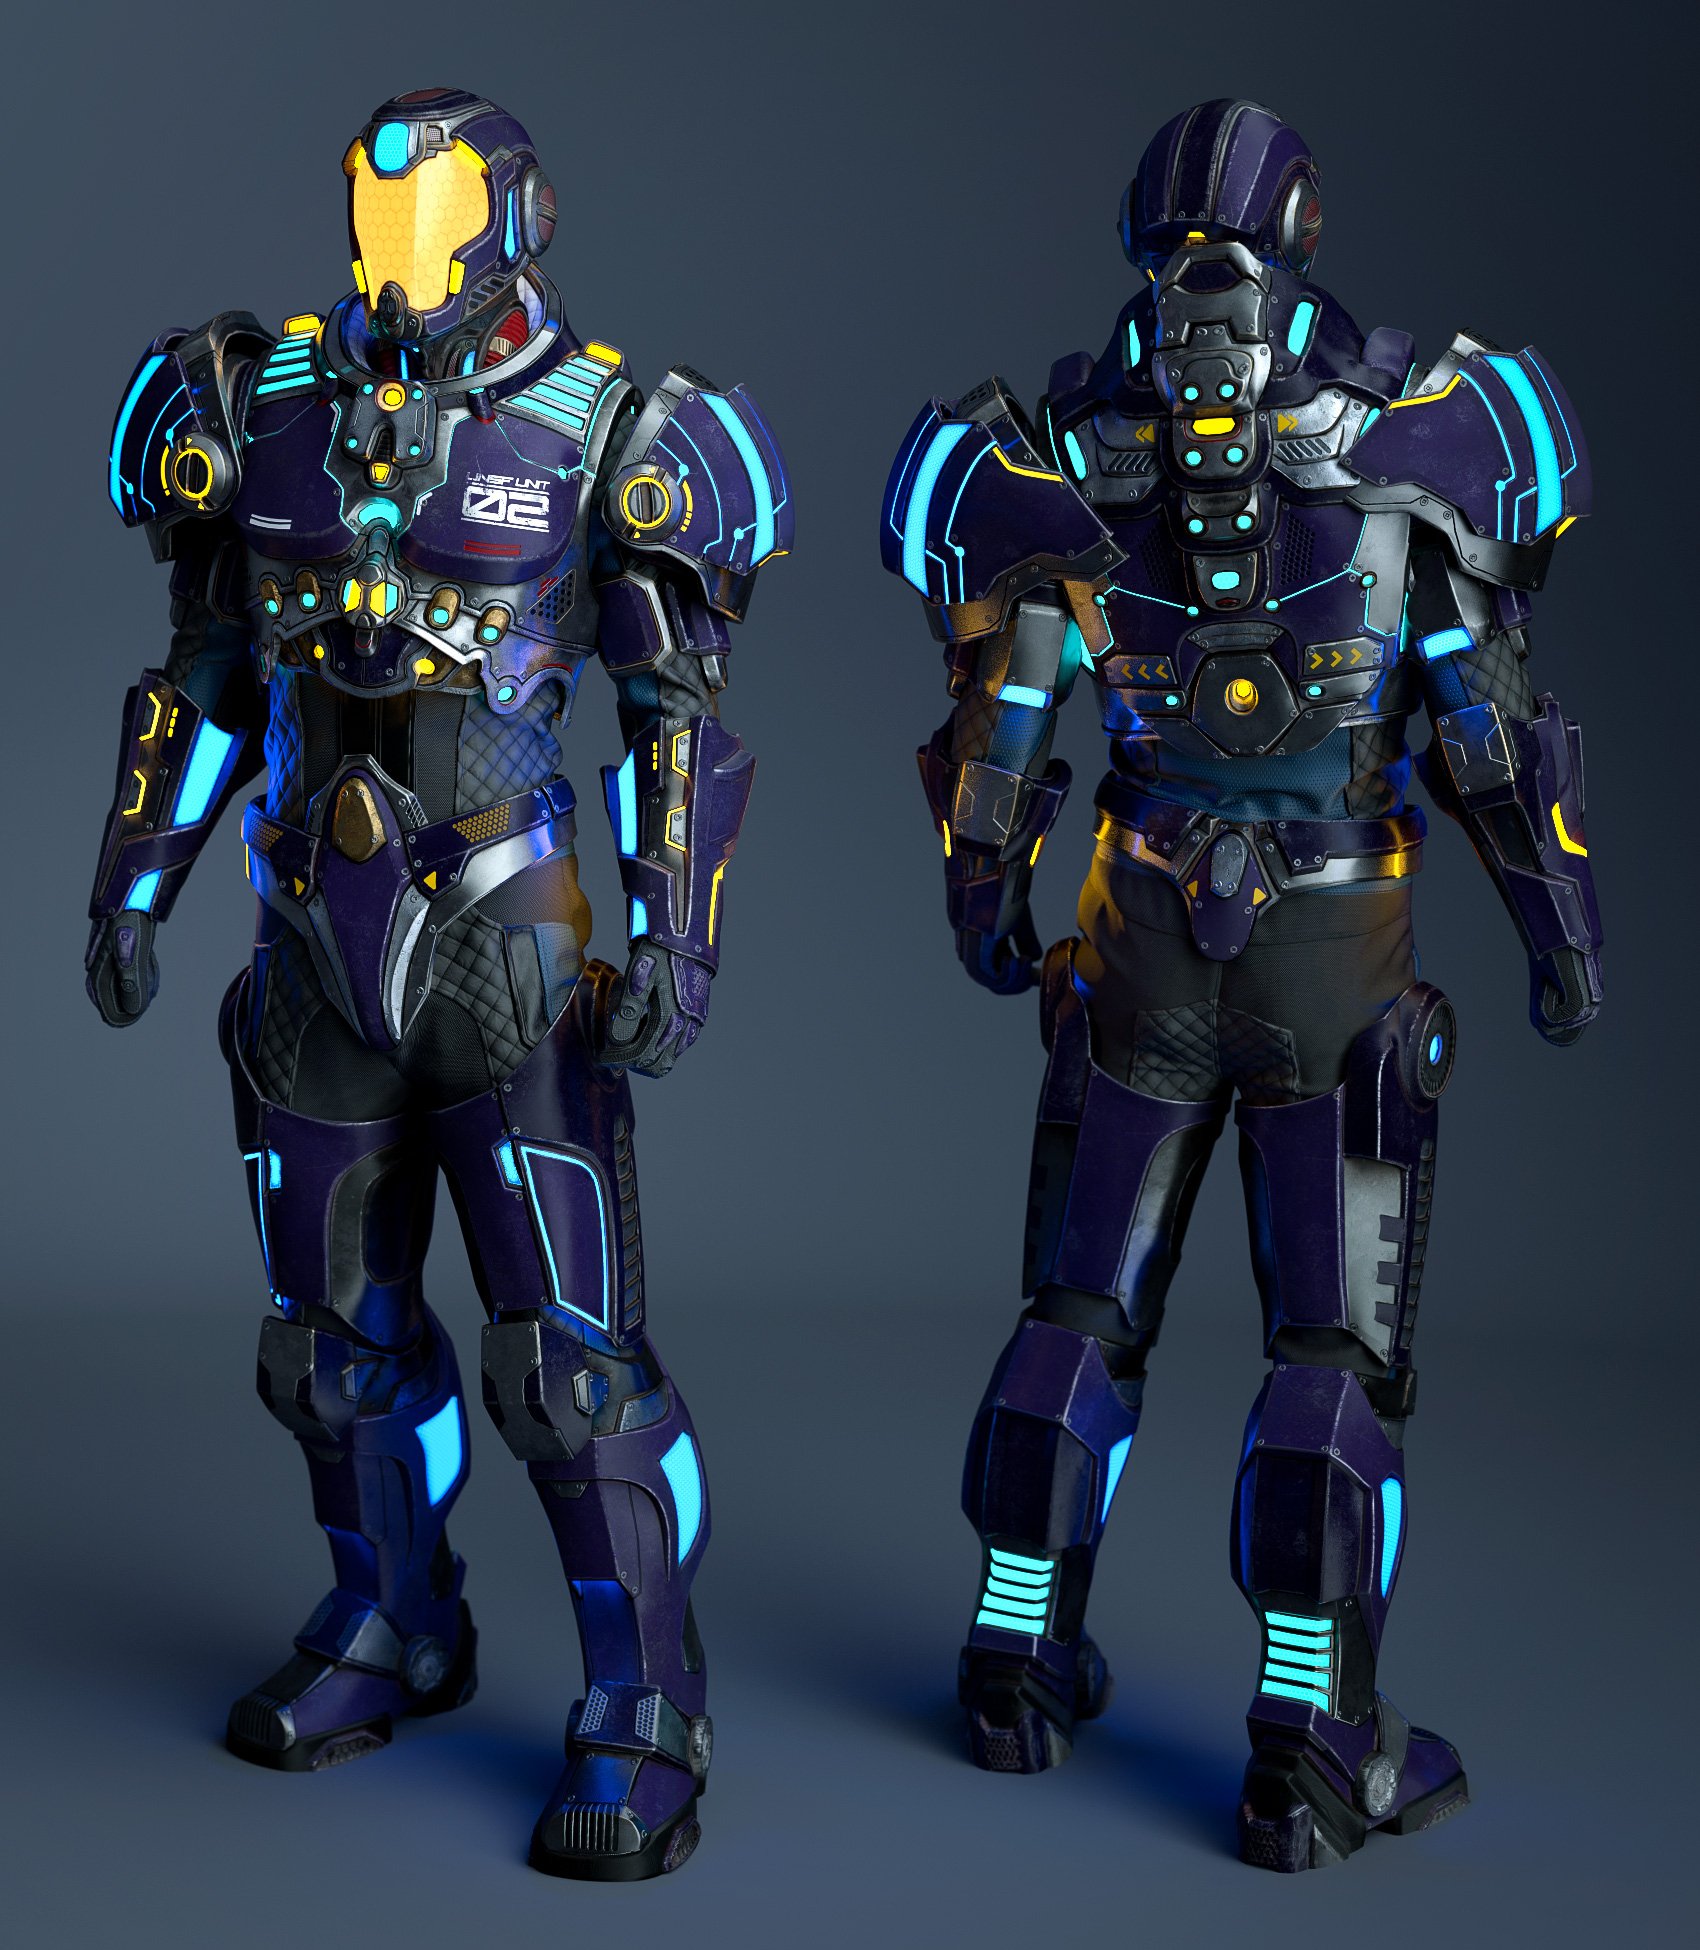 Intergalactic Soldier Armor for Genesis 8 and 8.1 Males by: Luthbel, 3D Models by Daz 3D